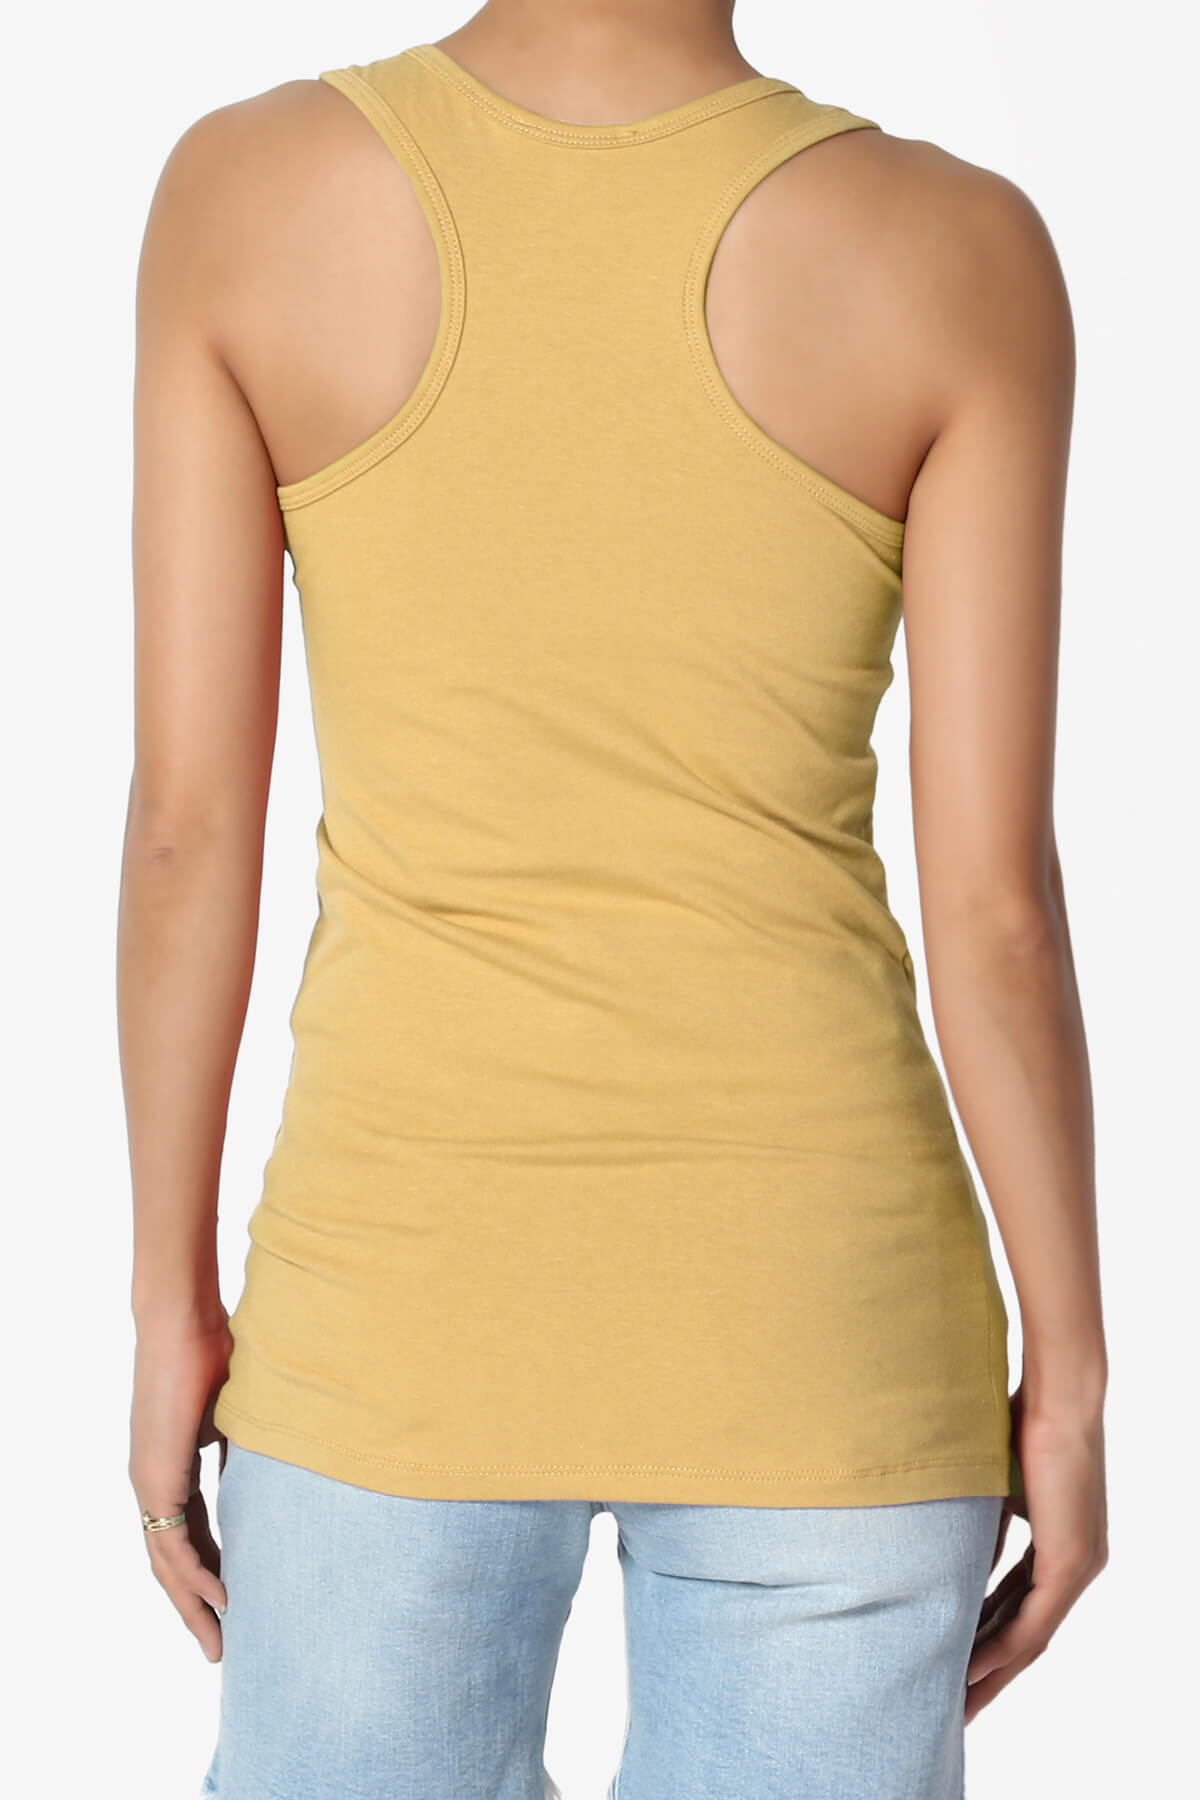 Load image into Gallery viewer, Marnie Racerback Tank Top LIGHT MUSTARD_2
